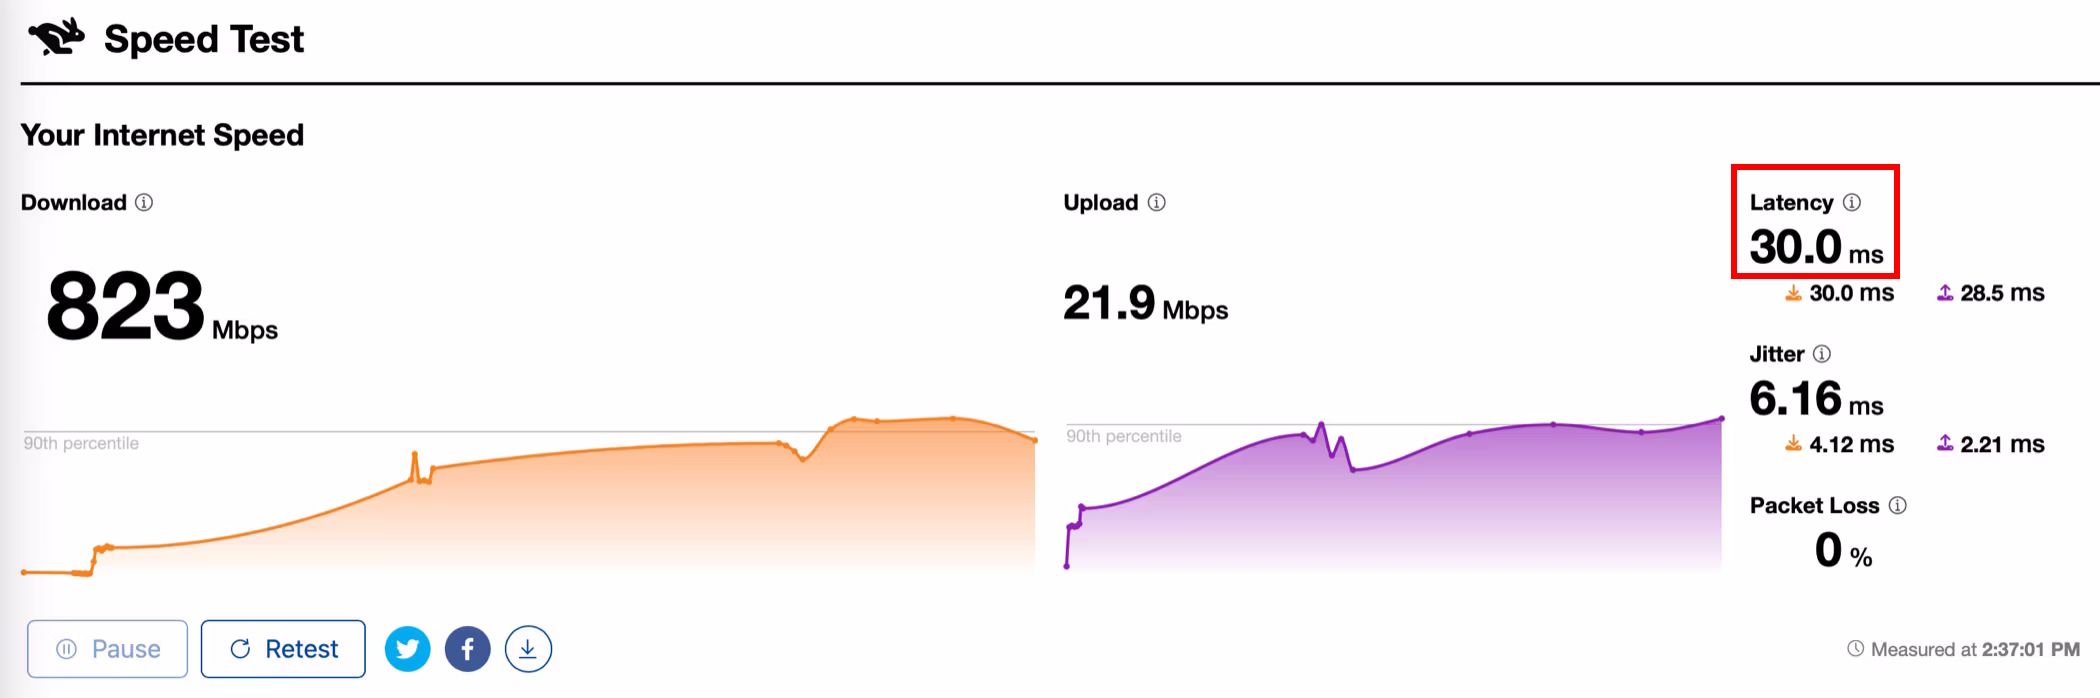 The results of an internet speed test, with latency highlighted,